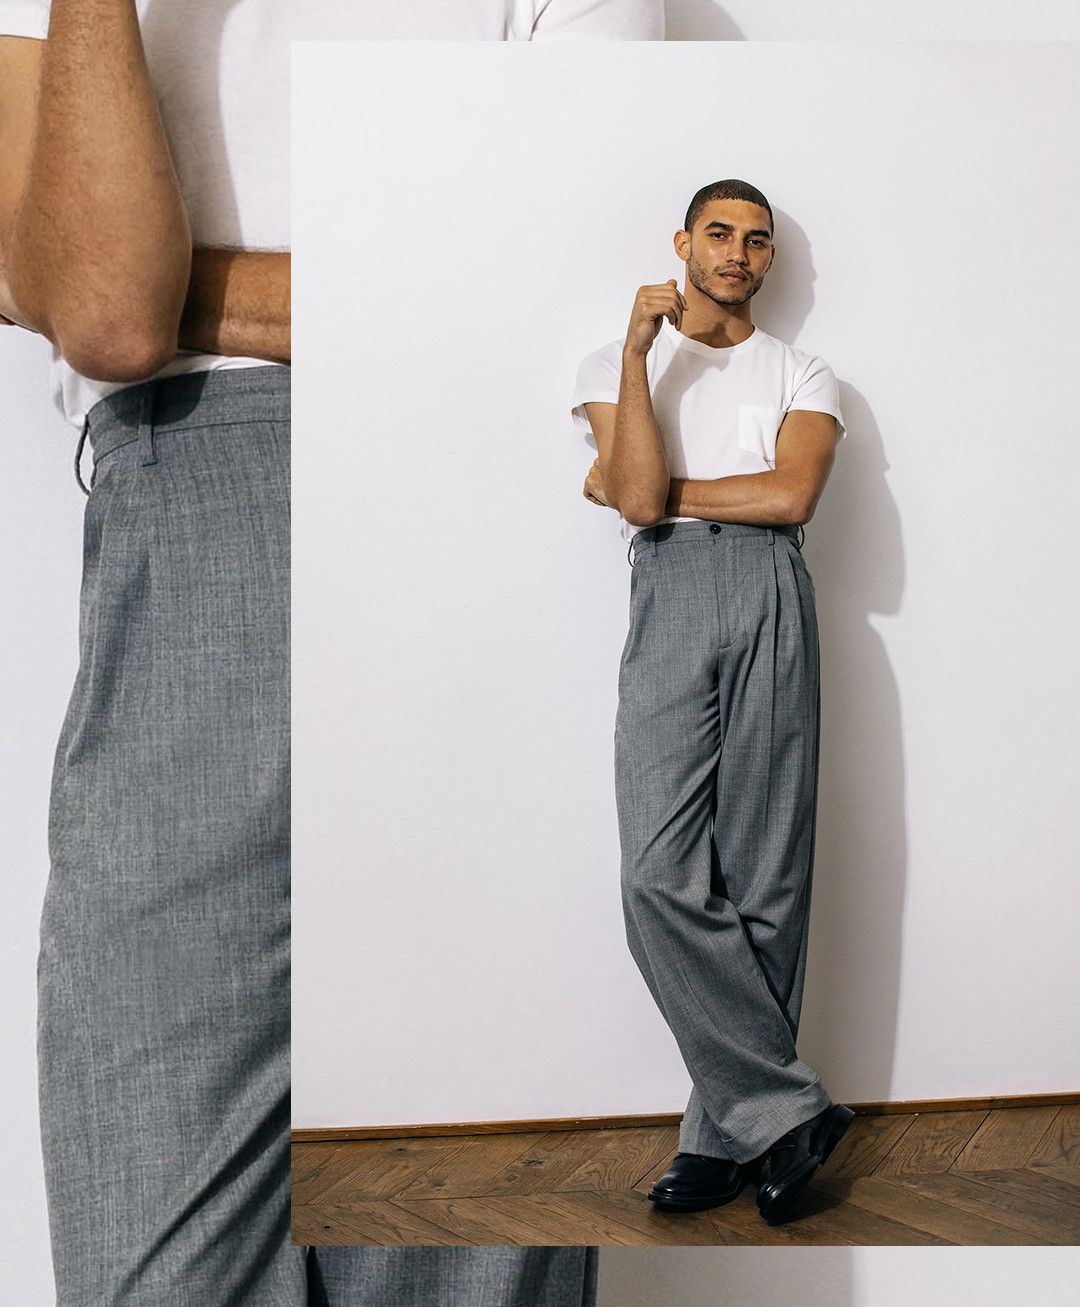 High-Waisted, Baggy Pants for Men in 2020